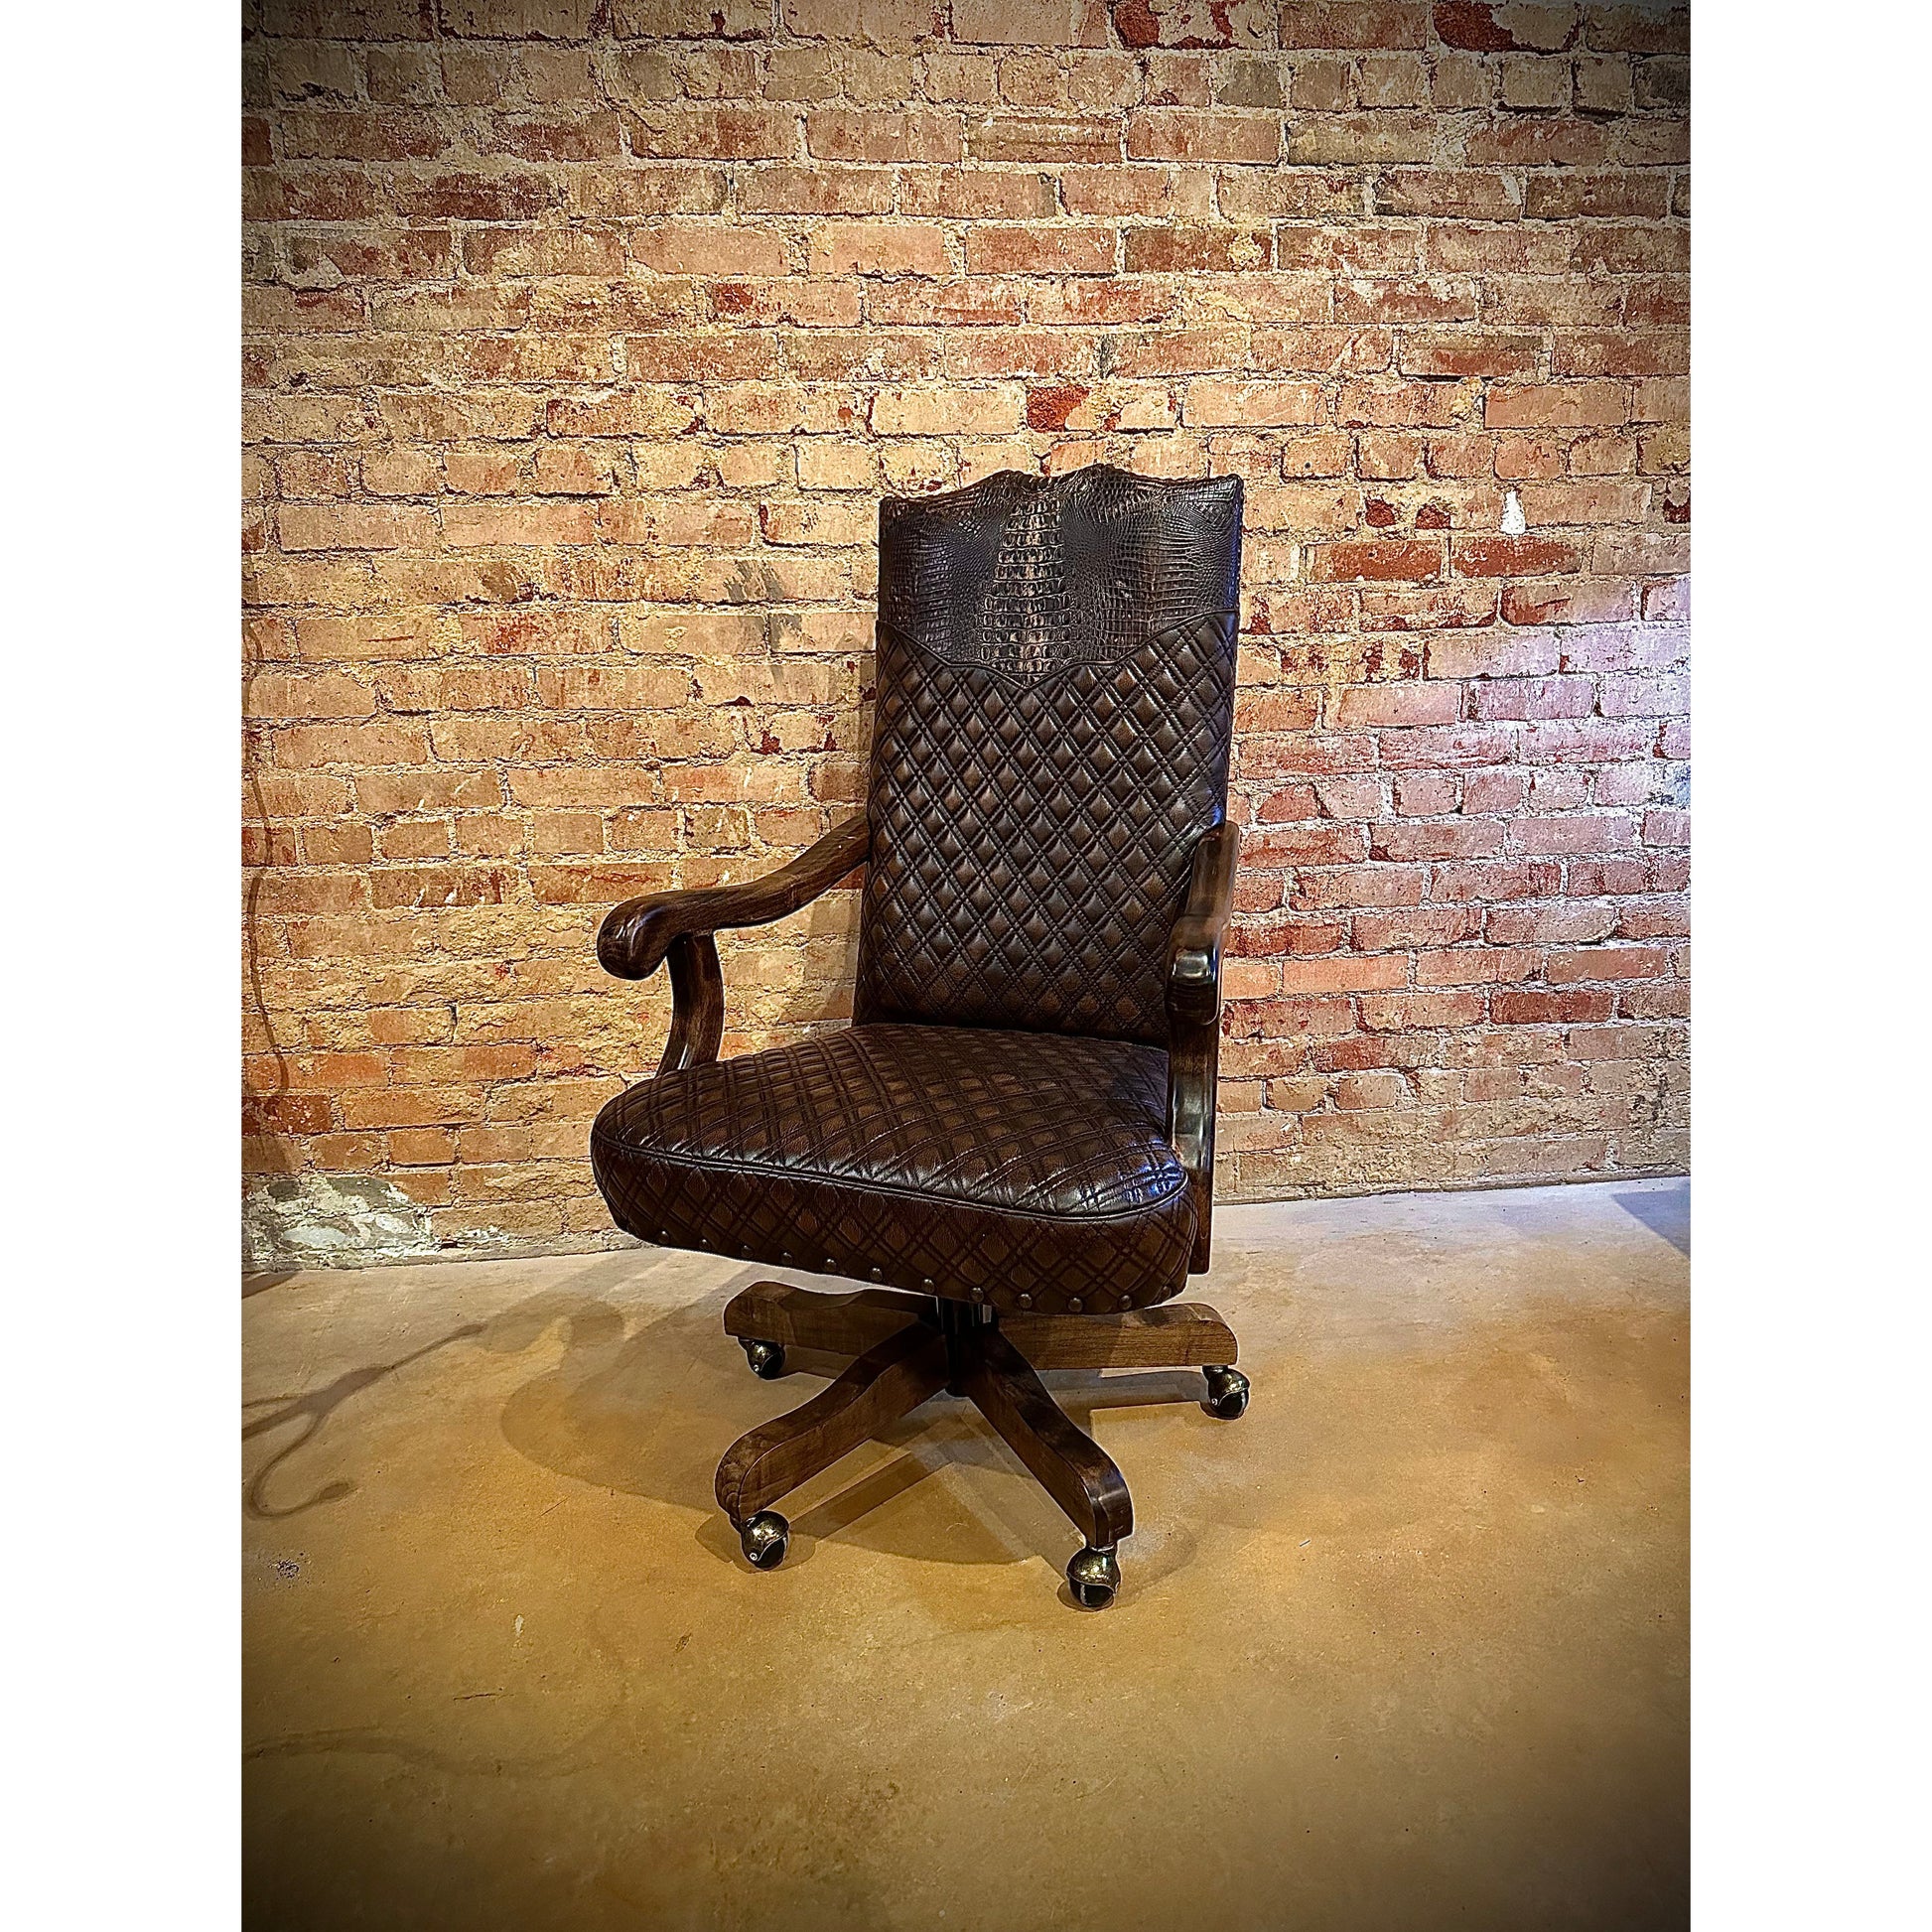 Indulge in luxurious comfort with our Quilted Chisum Office Chair. Crafted with top-quality cowhide and quilted leather, this chair adds a touch of elegance to any office space. With its swivel feature, you can easily move around without sacrificing comfort. Upgrade your workspace today with this perfect blend of style and functionality.